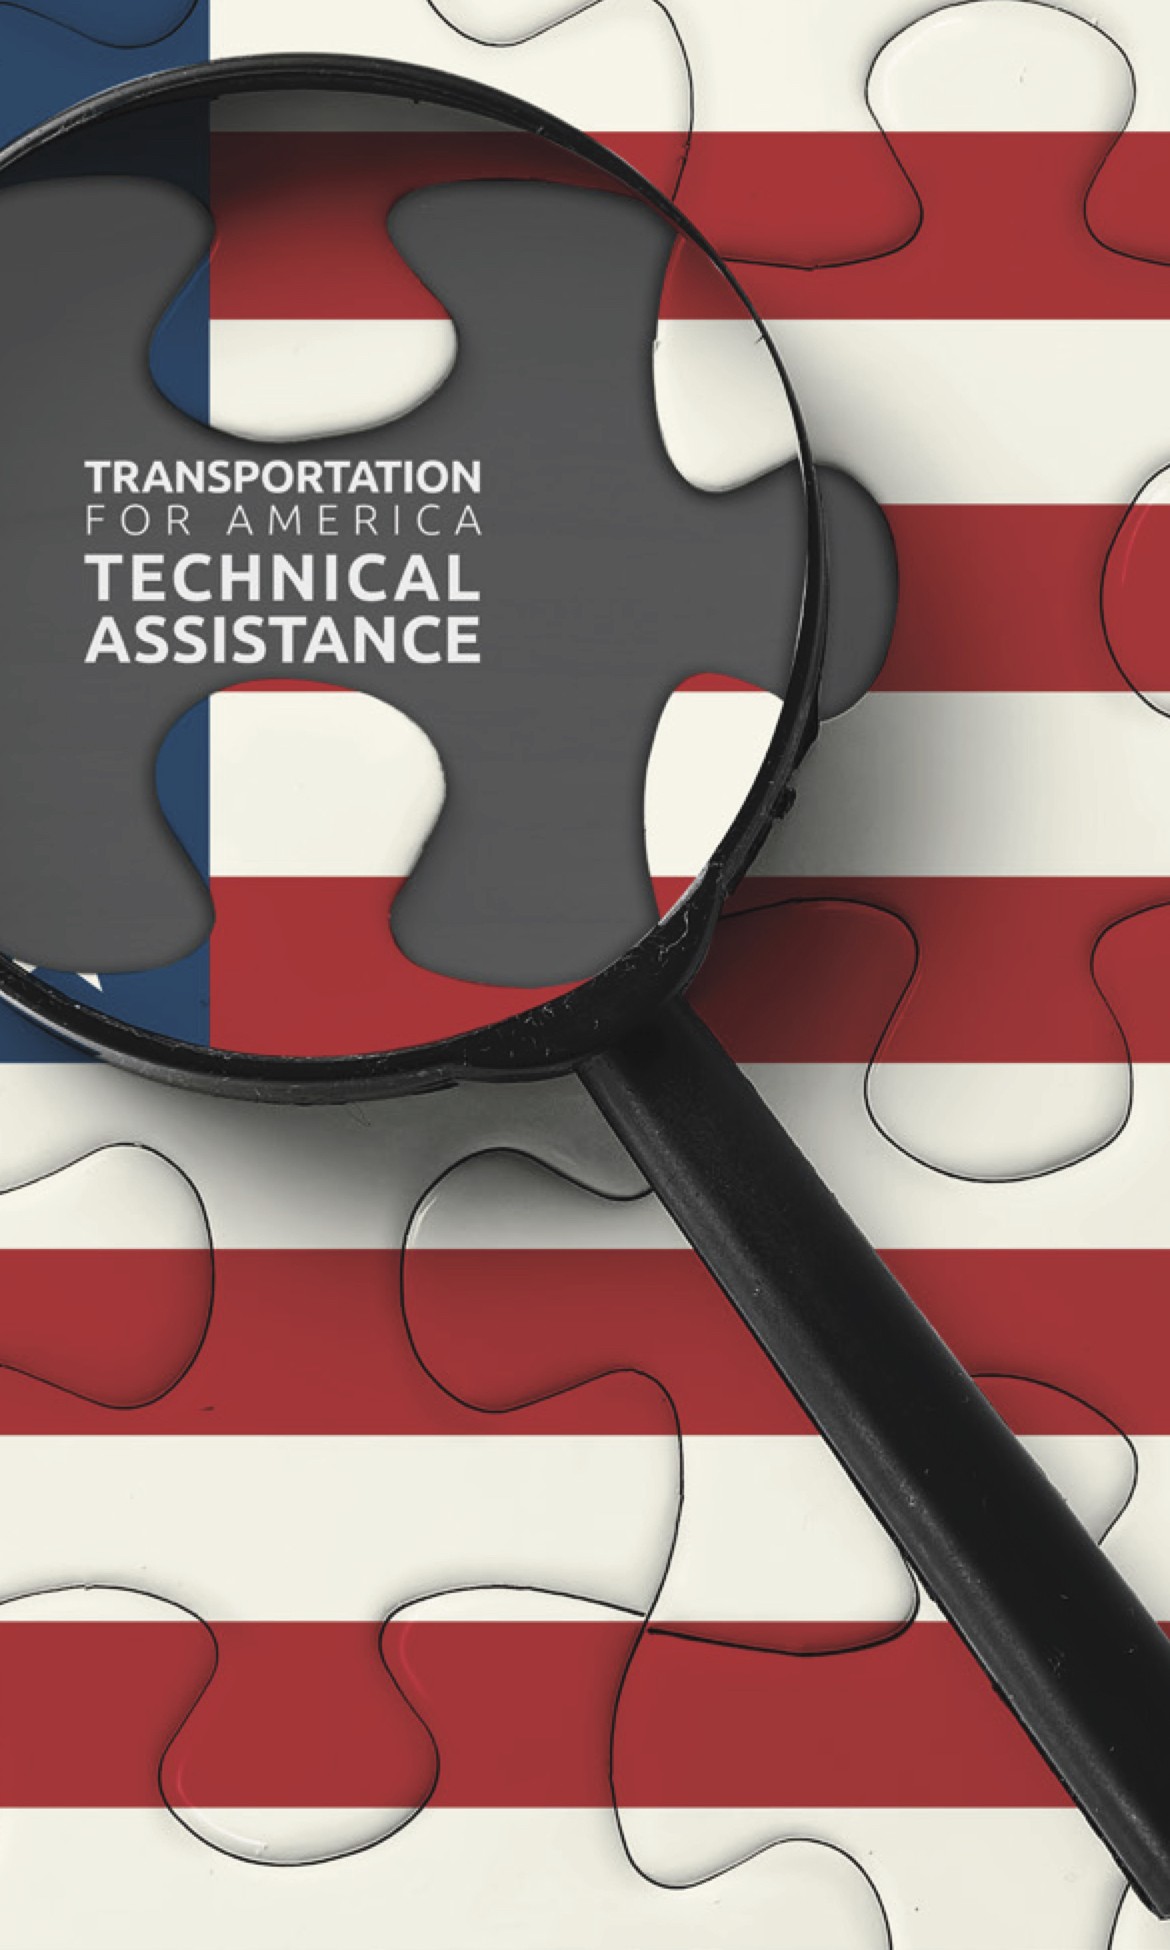 Transportation for America technical assistance